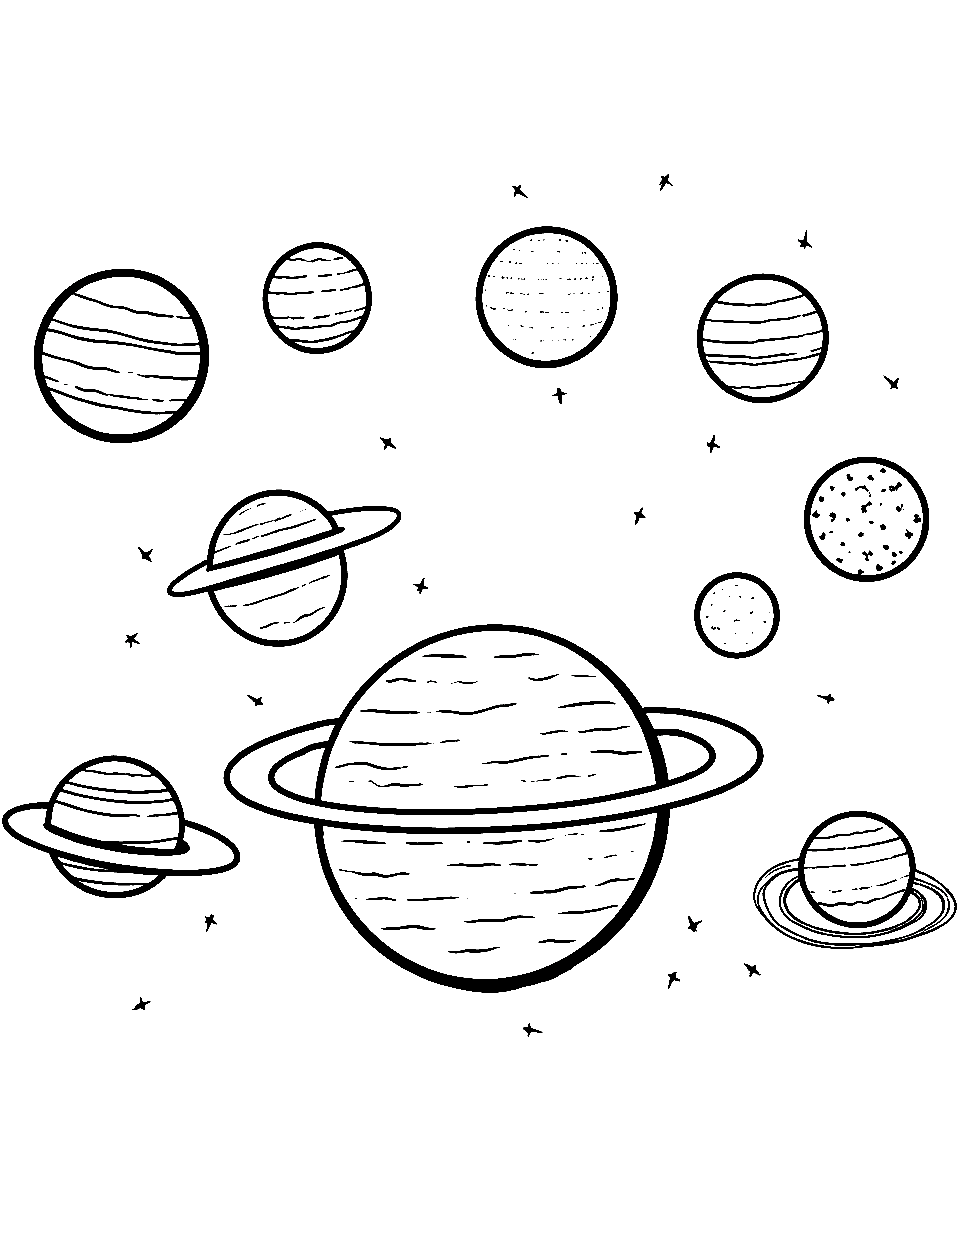 Saturn's Moons Solar System Coloring Page - Several of Saturn’s moons shown in varying sizes and distances.